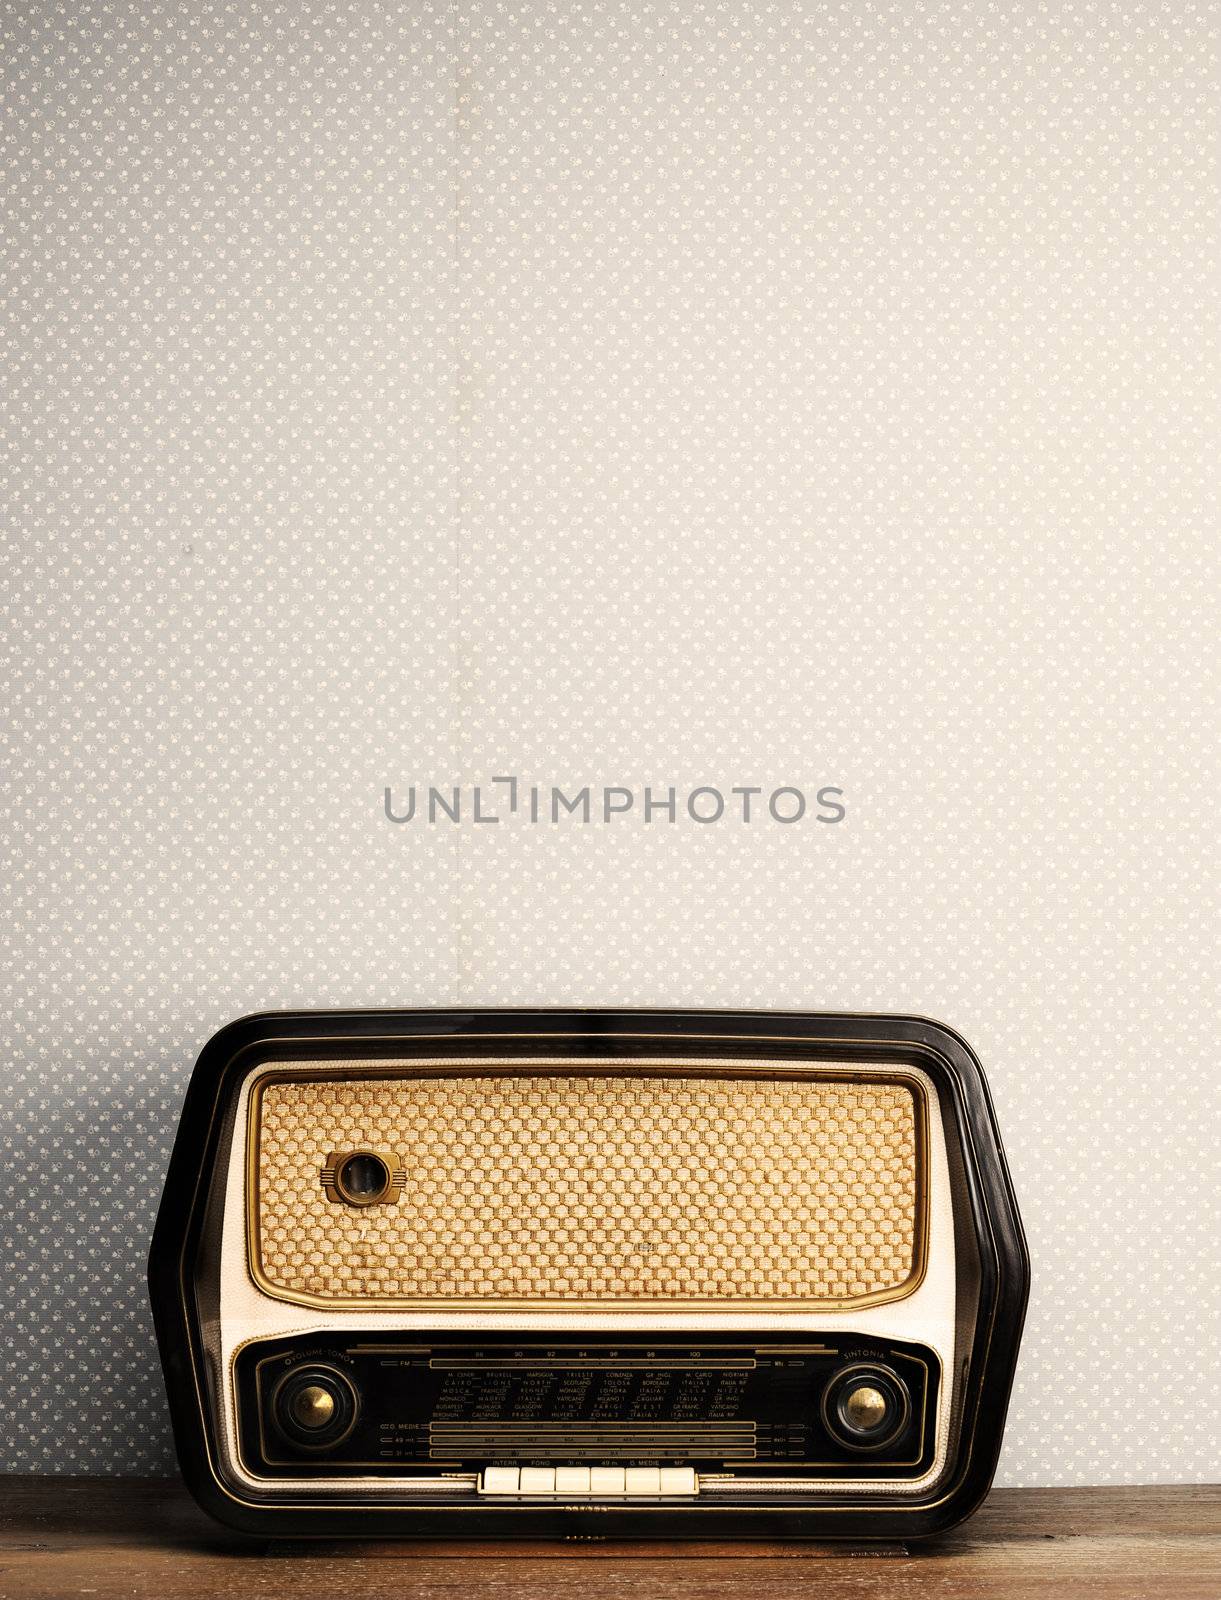 antique radio on vintage background by stokkete